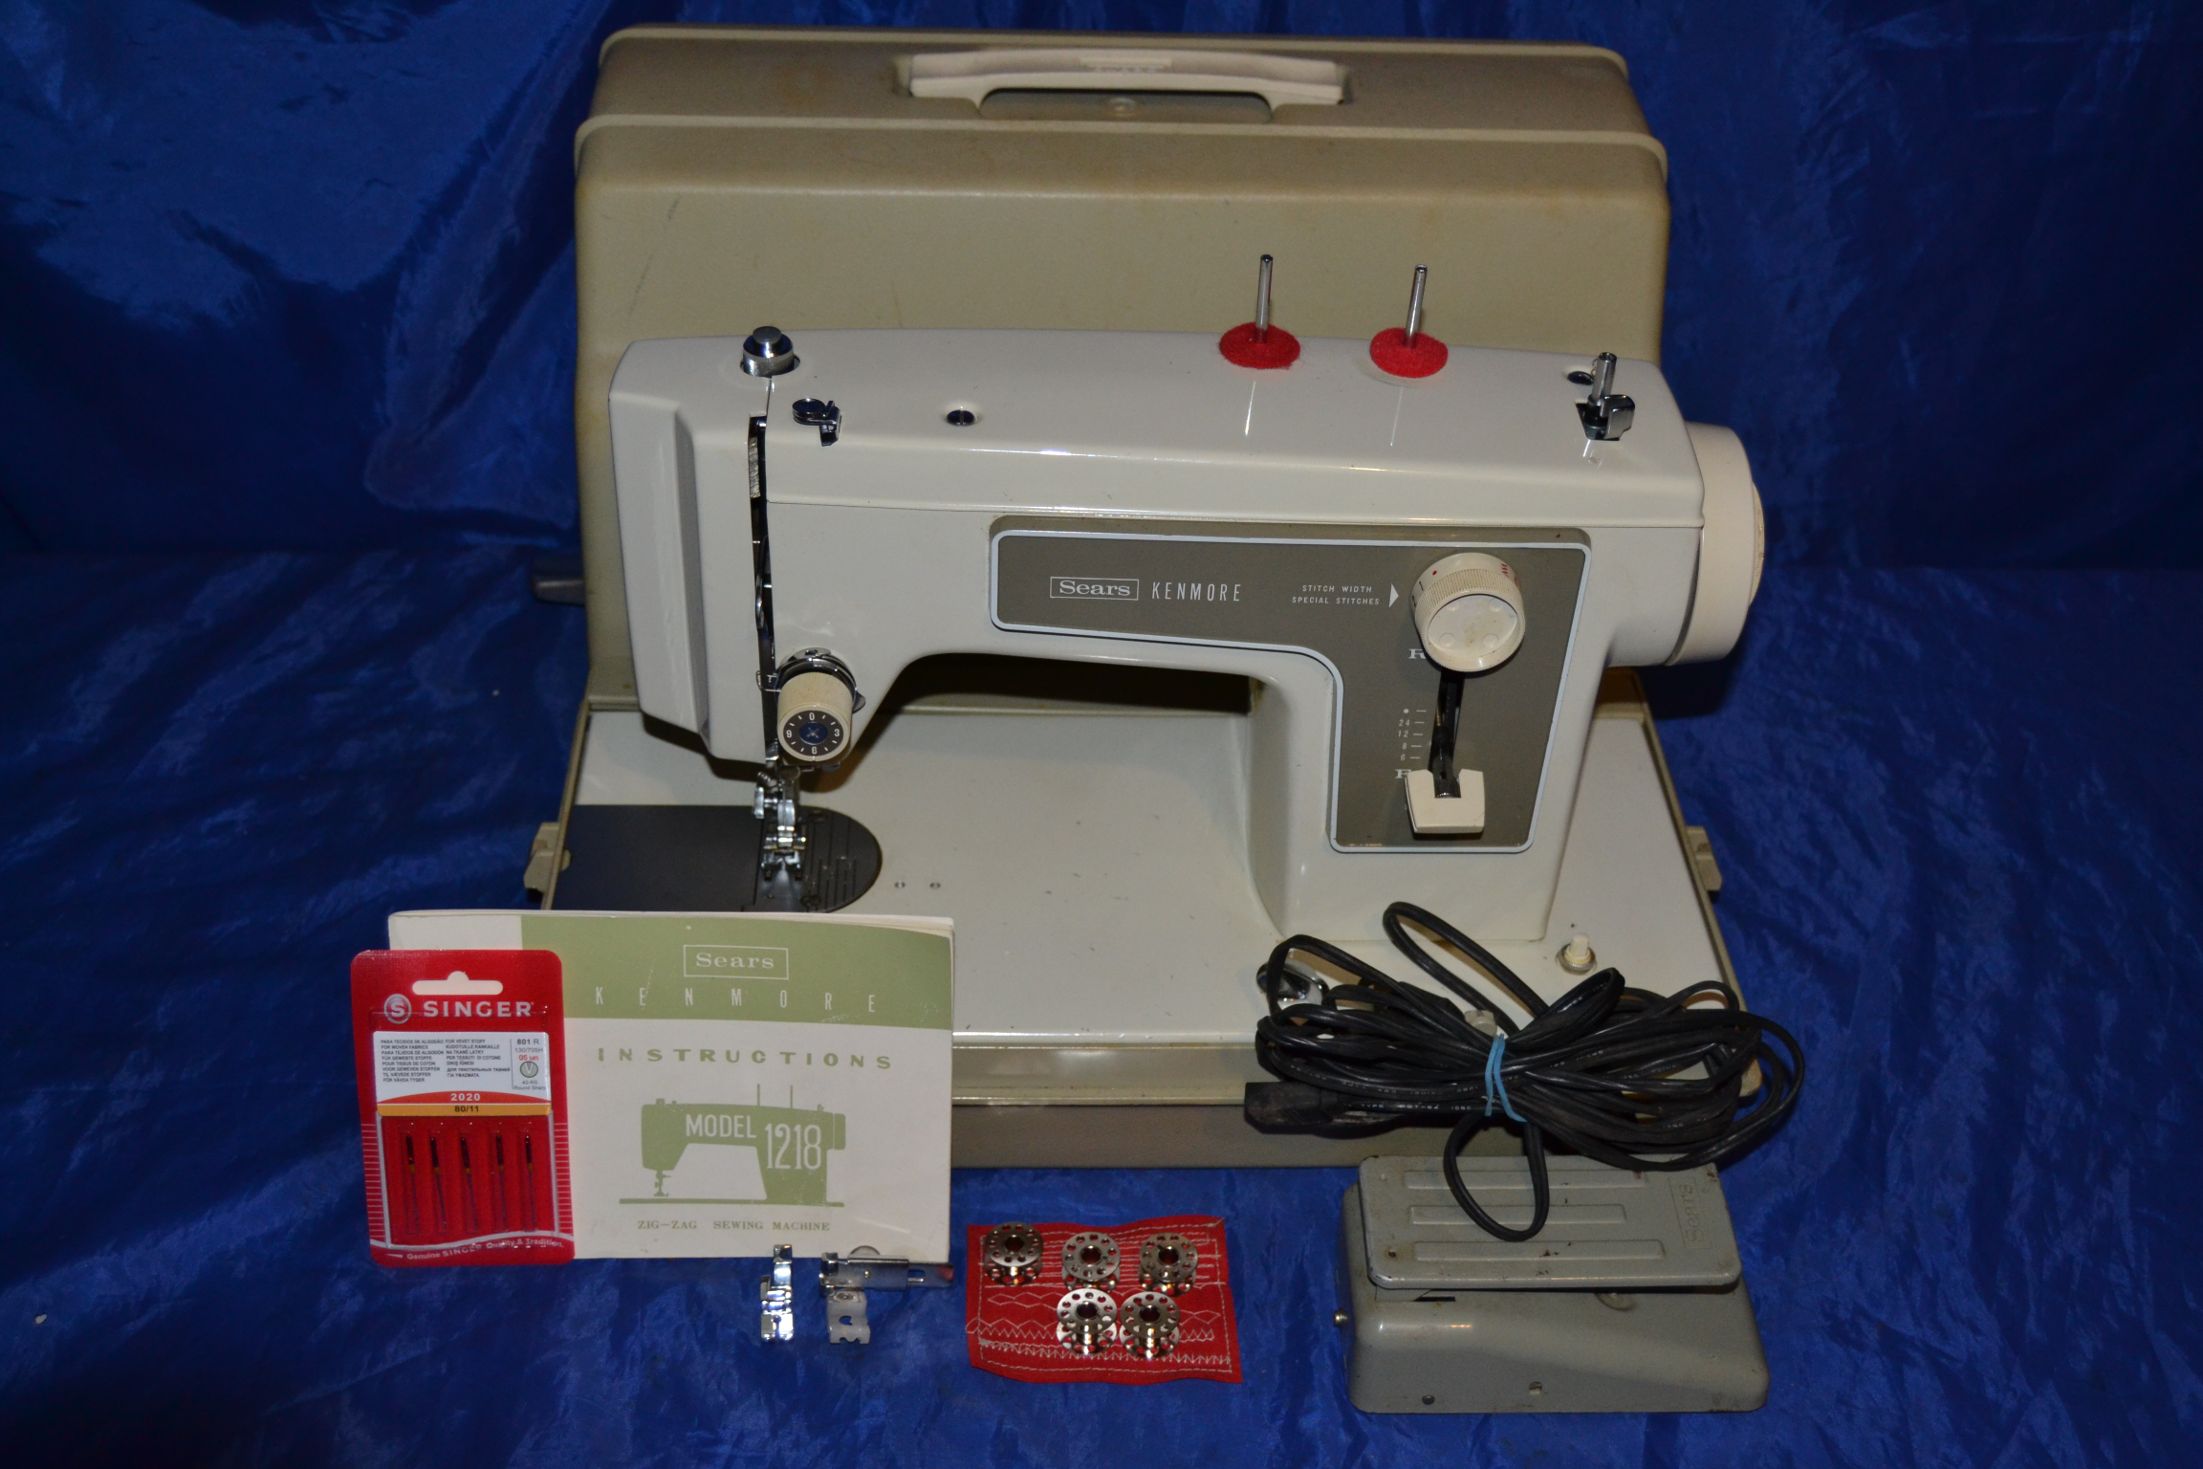 KENMORE 148.12201 ZIGZAG SEWING MACHINE IN CASE MANUAL SERVICED READY